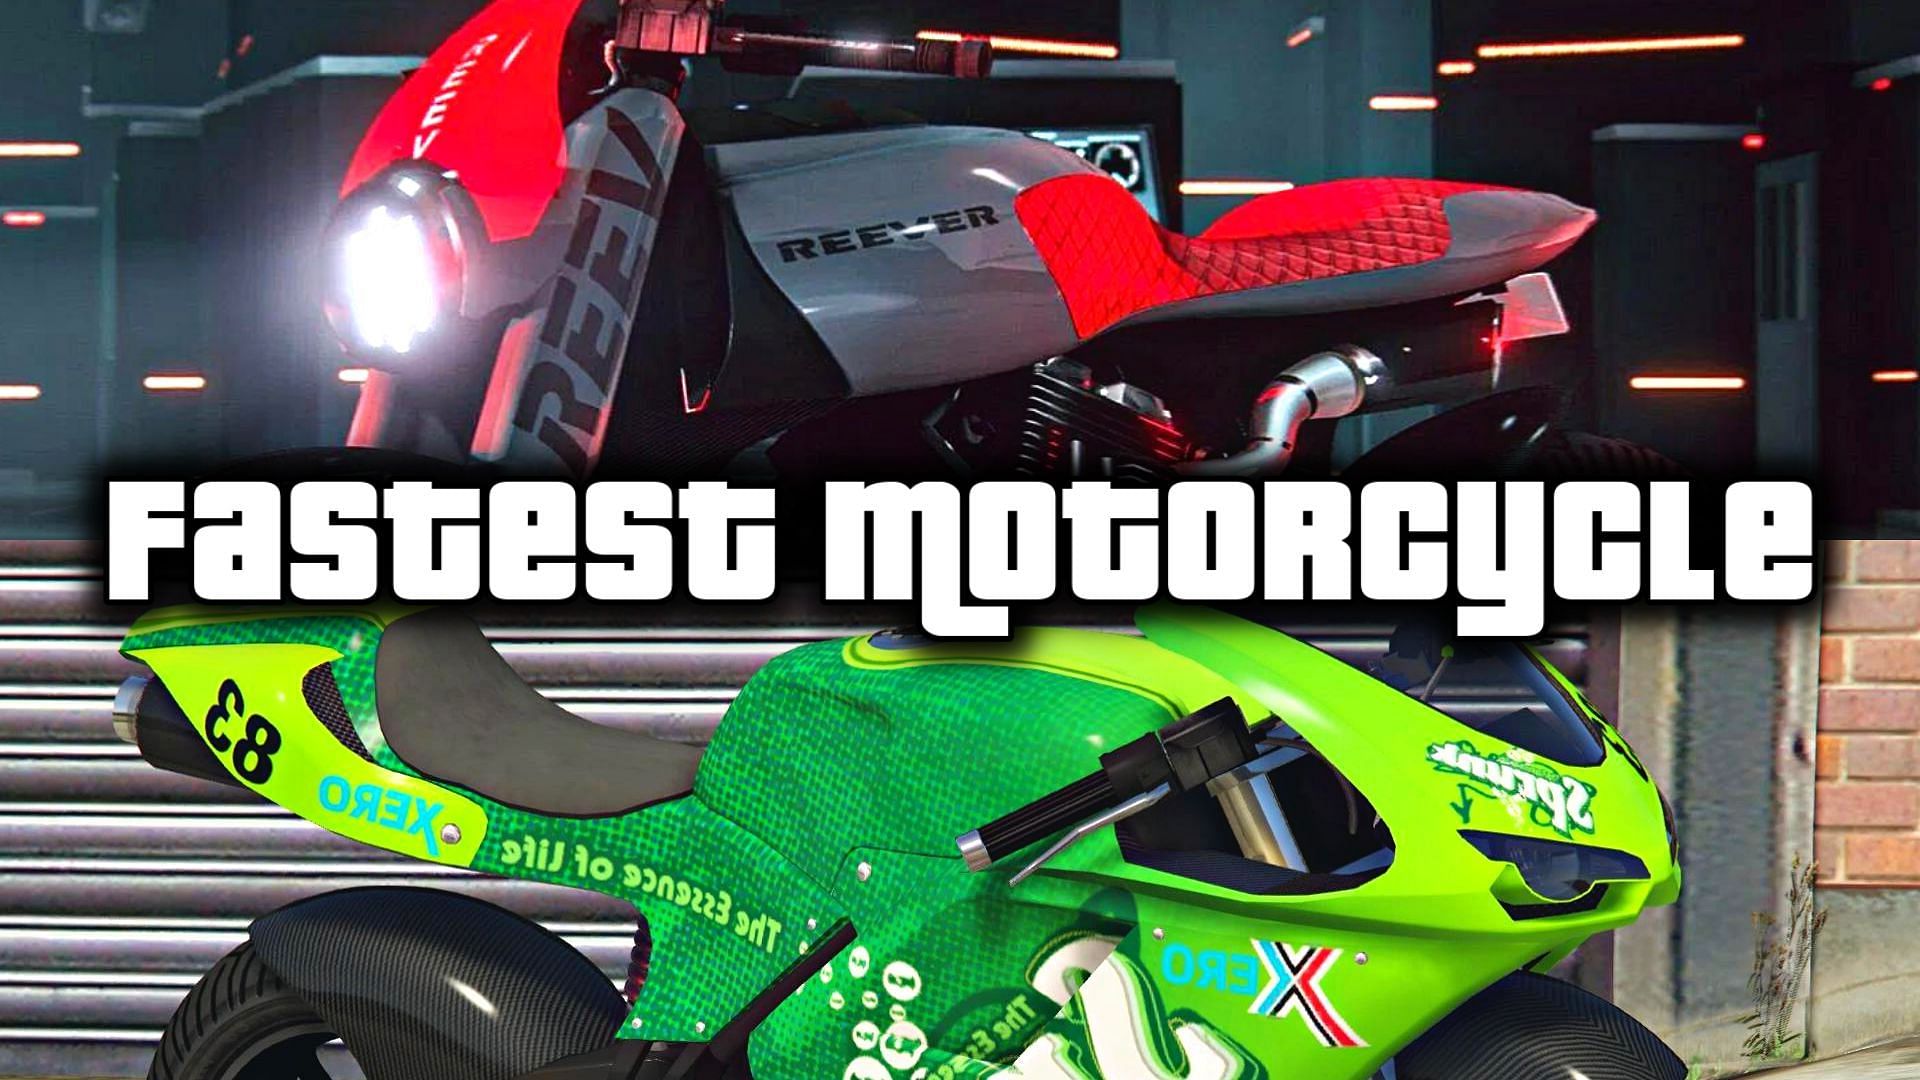 A brief about Bati 801 and Western Reever, the fastest motorcycles in GTA 5 and GTA Online (Image via Rockstar Games)